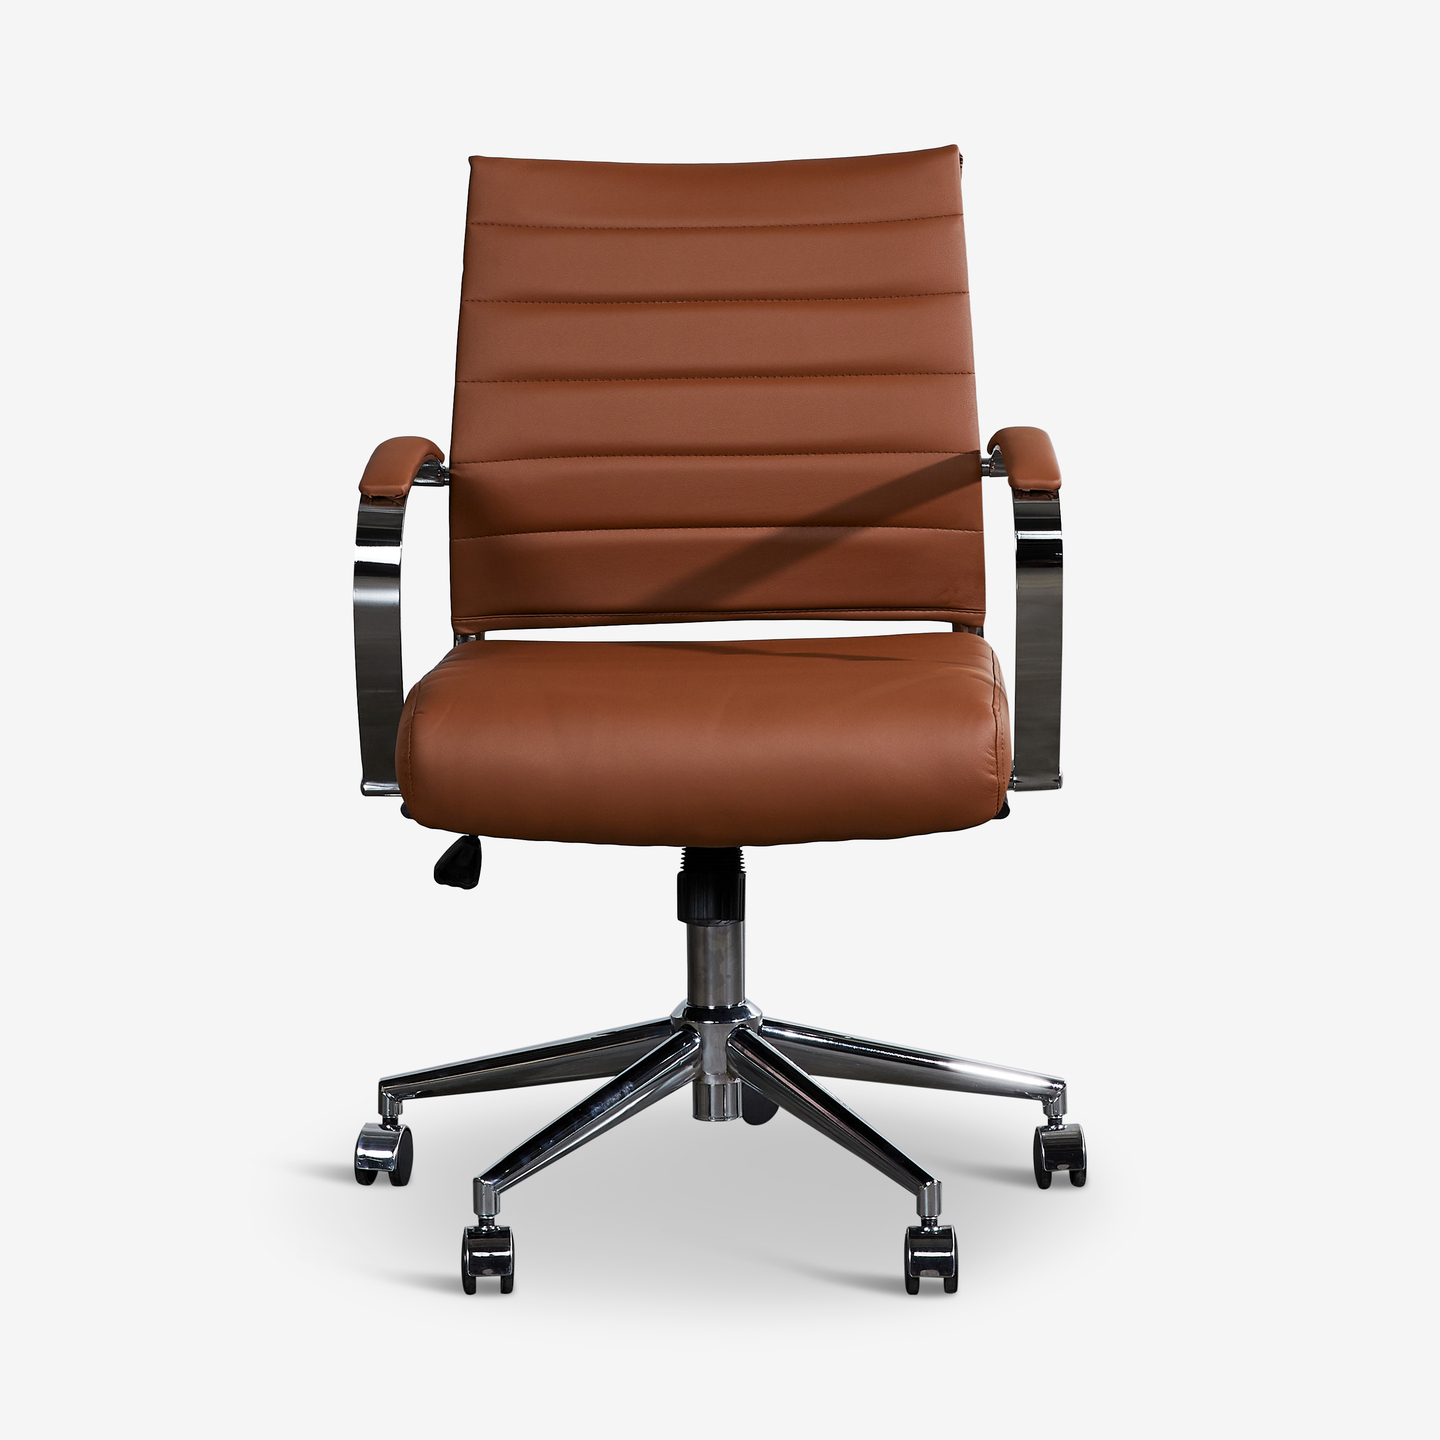 207_Tremaine-Office-Chair-Terracotta_Flat-Front 2020